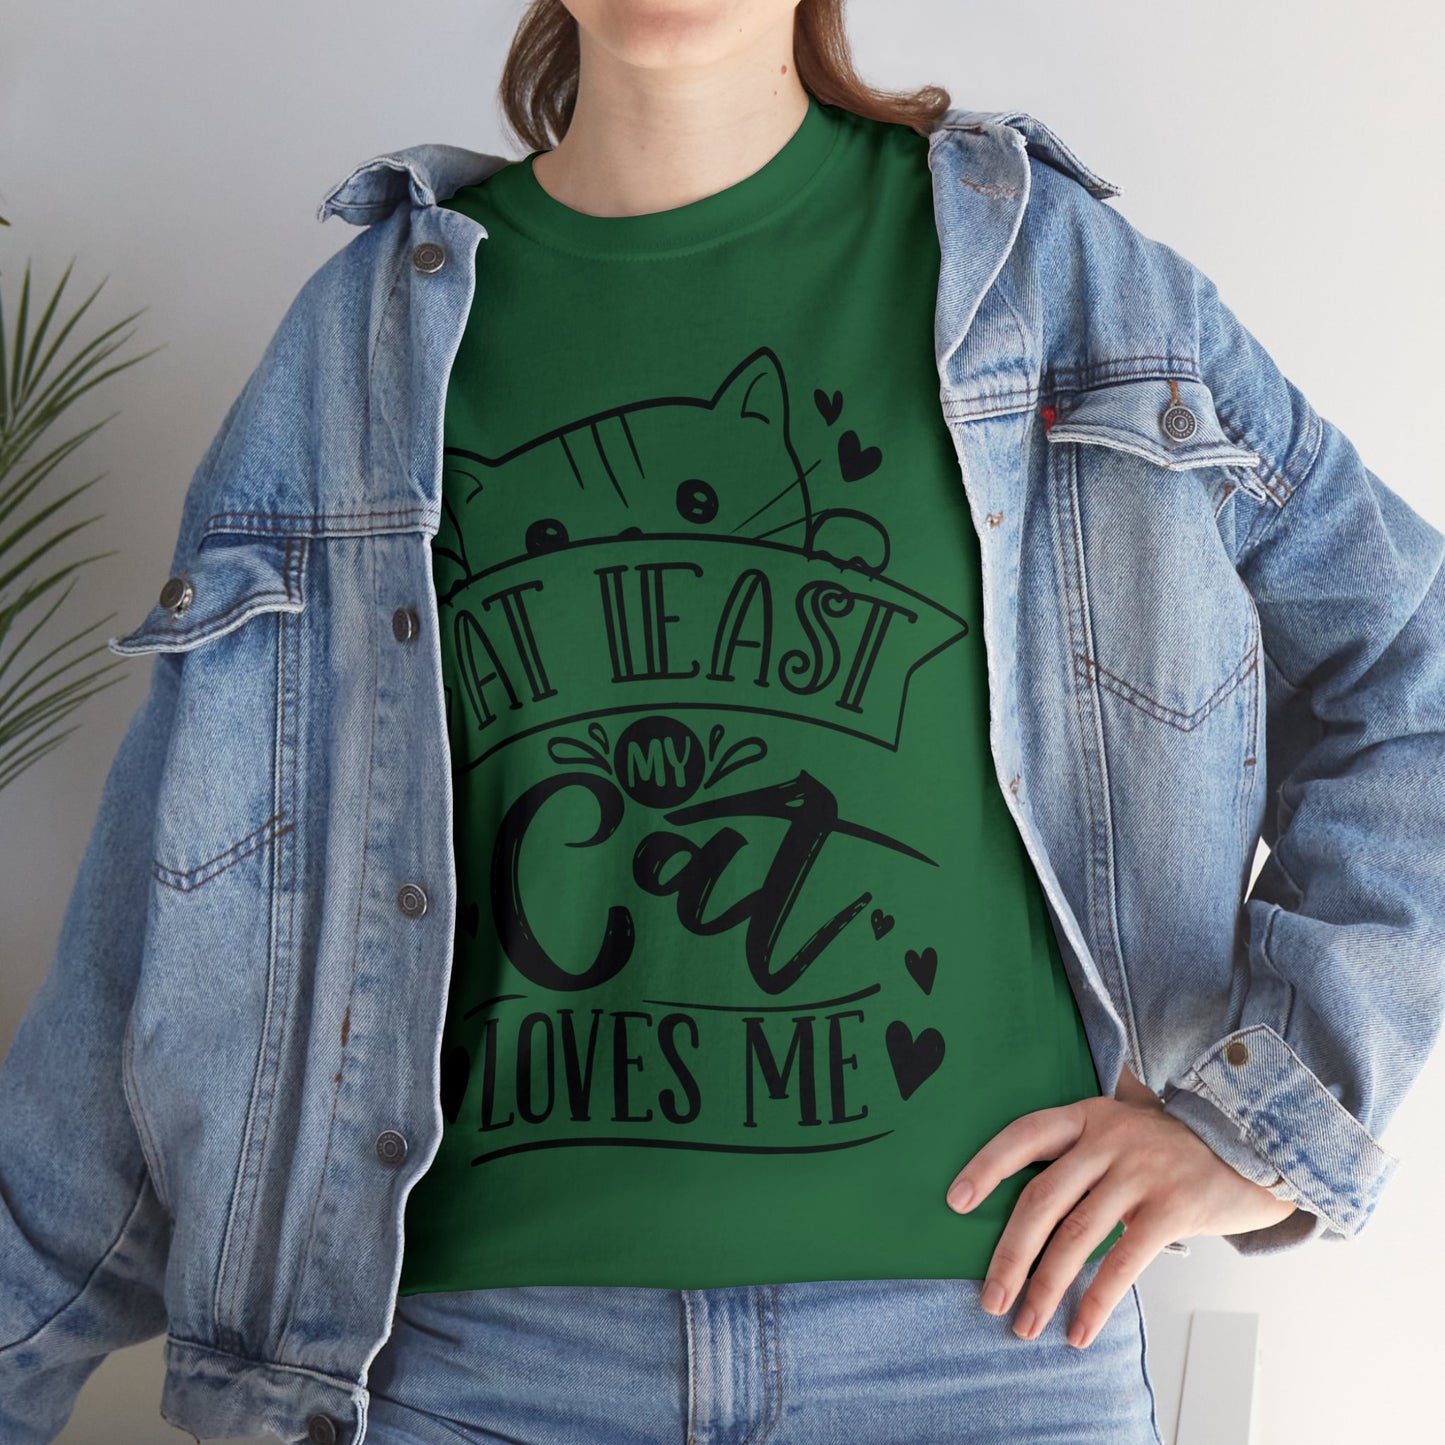 At Least My Cat Loves Me Unisex Heavy Cotton Tee